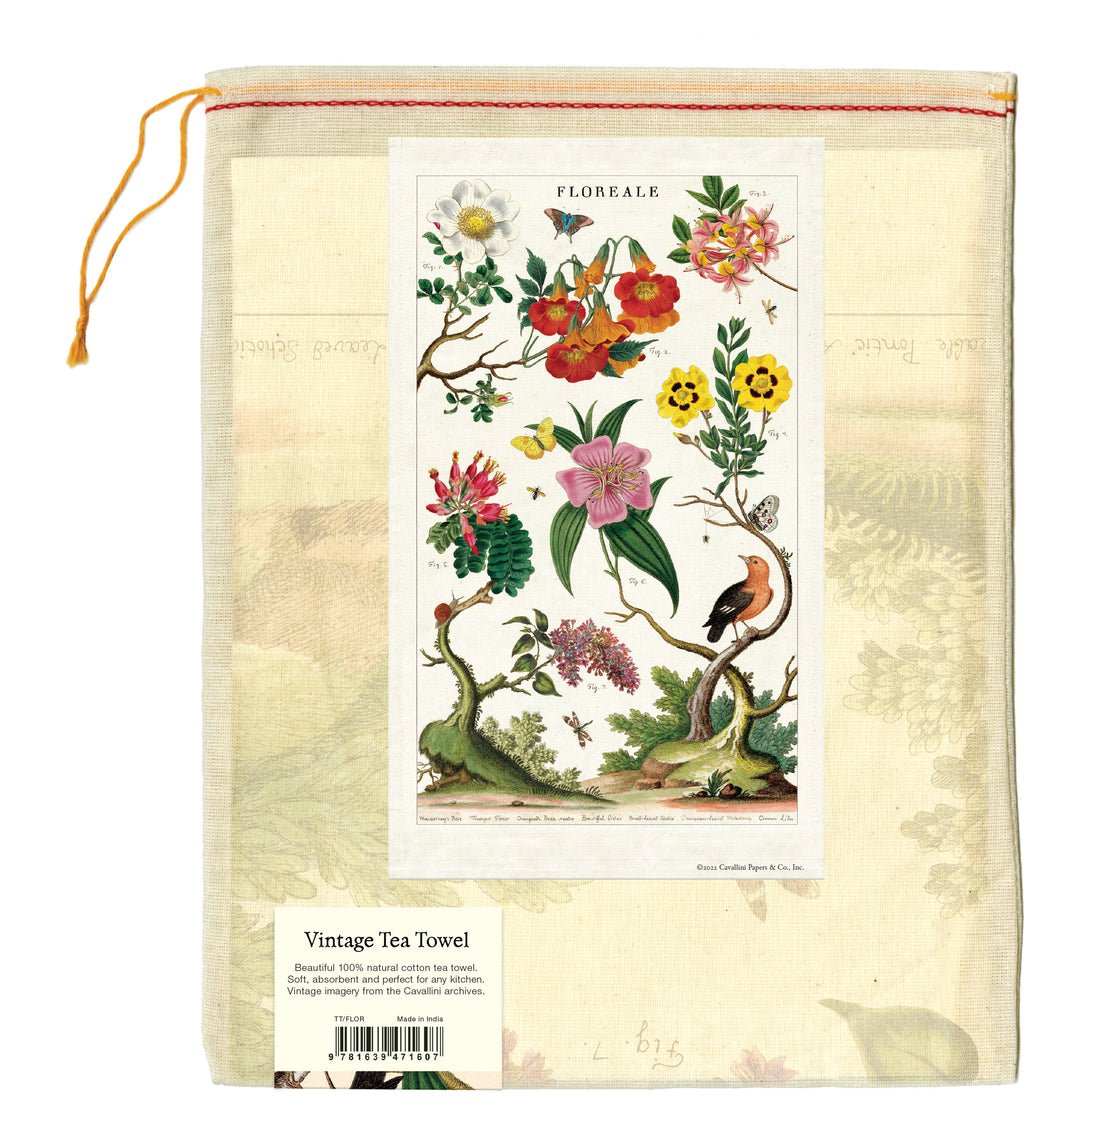 Illustration of various flowers and a Floreale tea towel, labeled with numbers corresponding to species, in a classic botanical chart style inspired by vintage Cavallini Papers &amp; Co flower images.